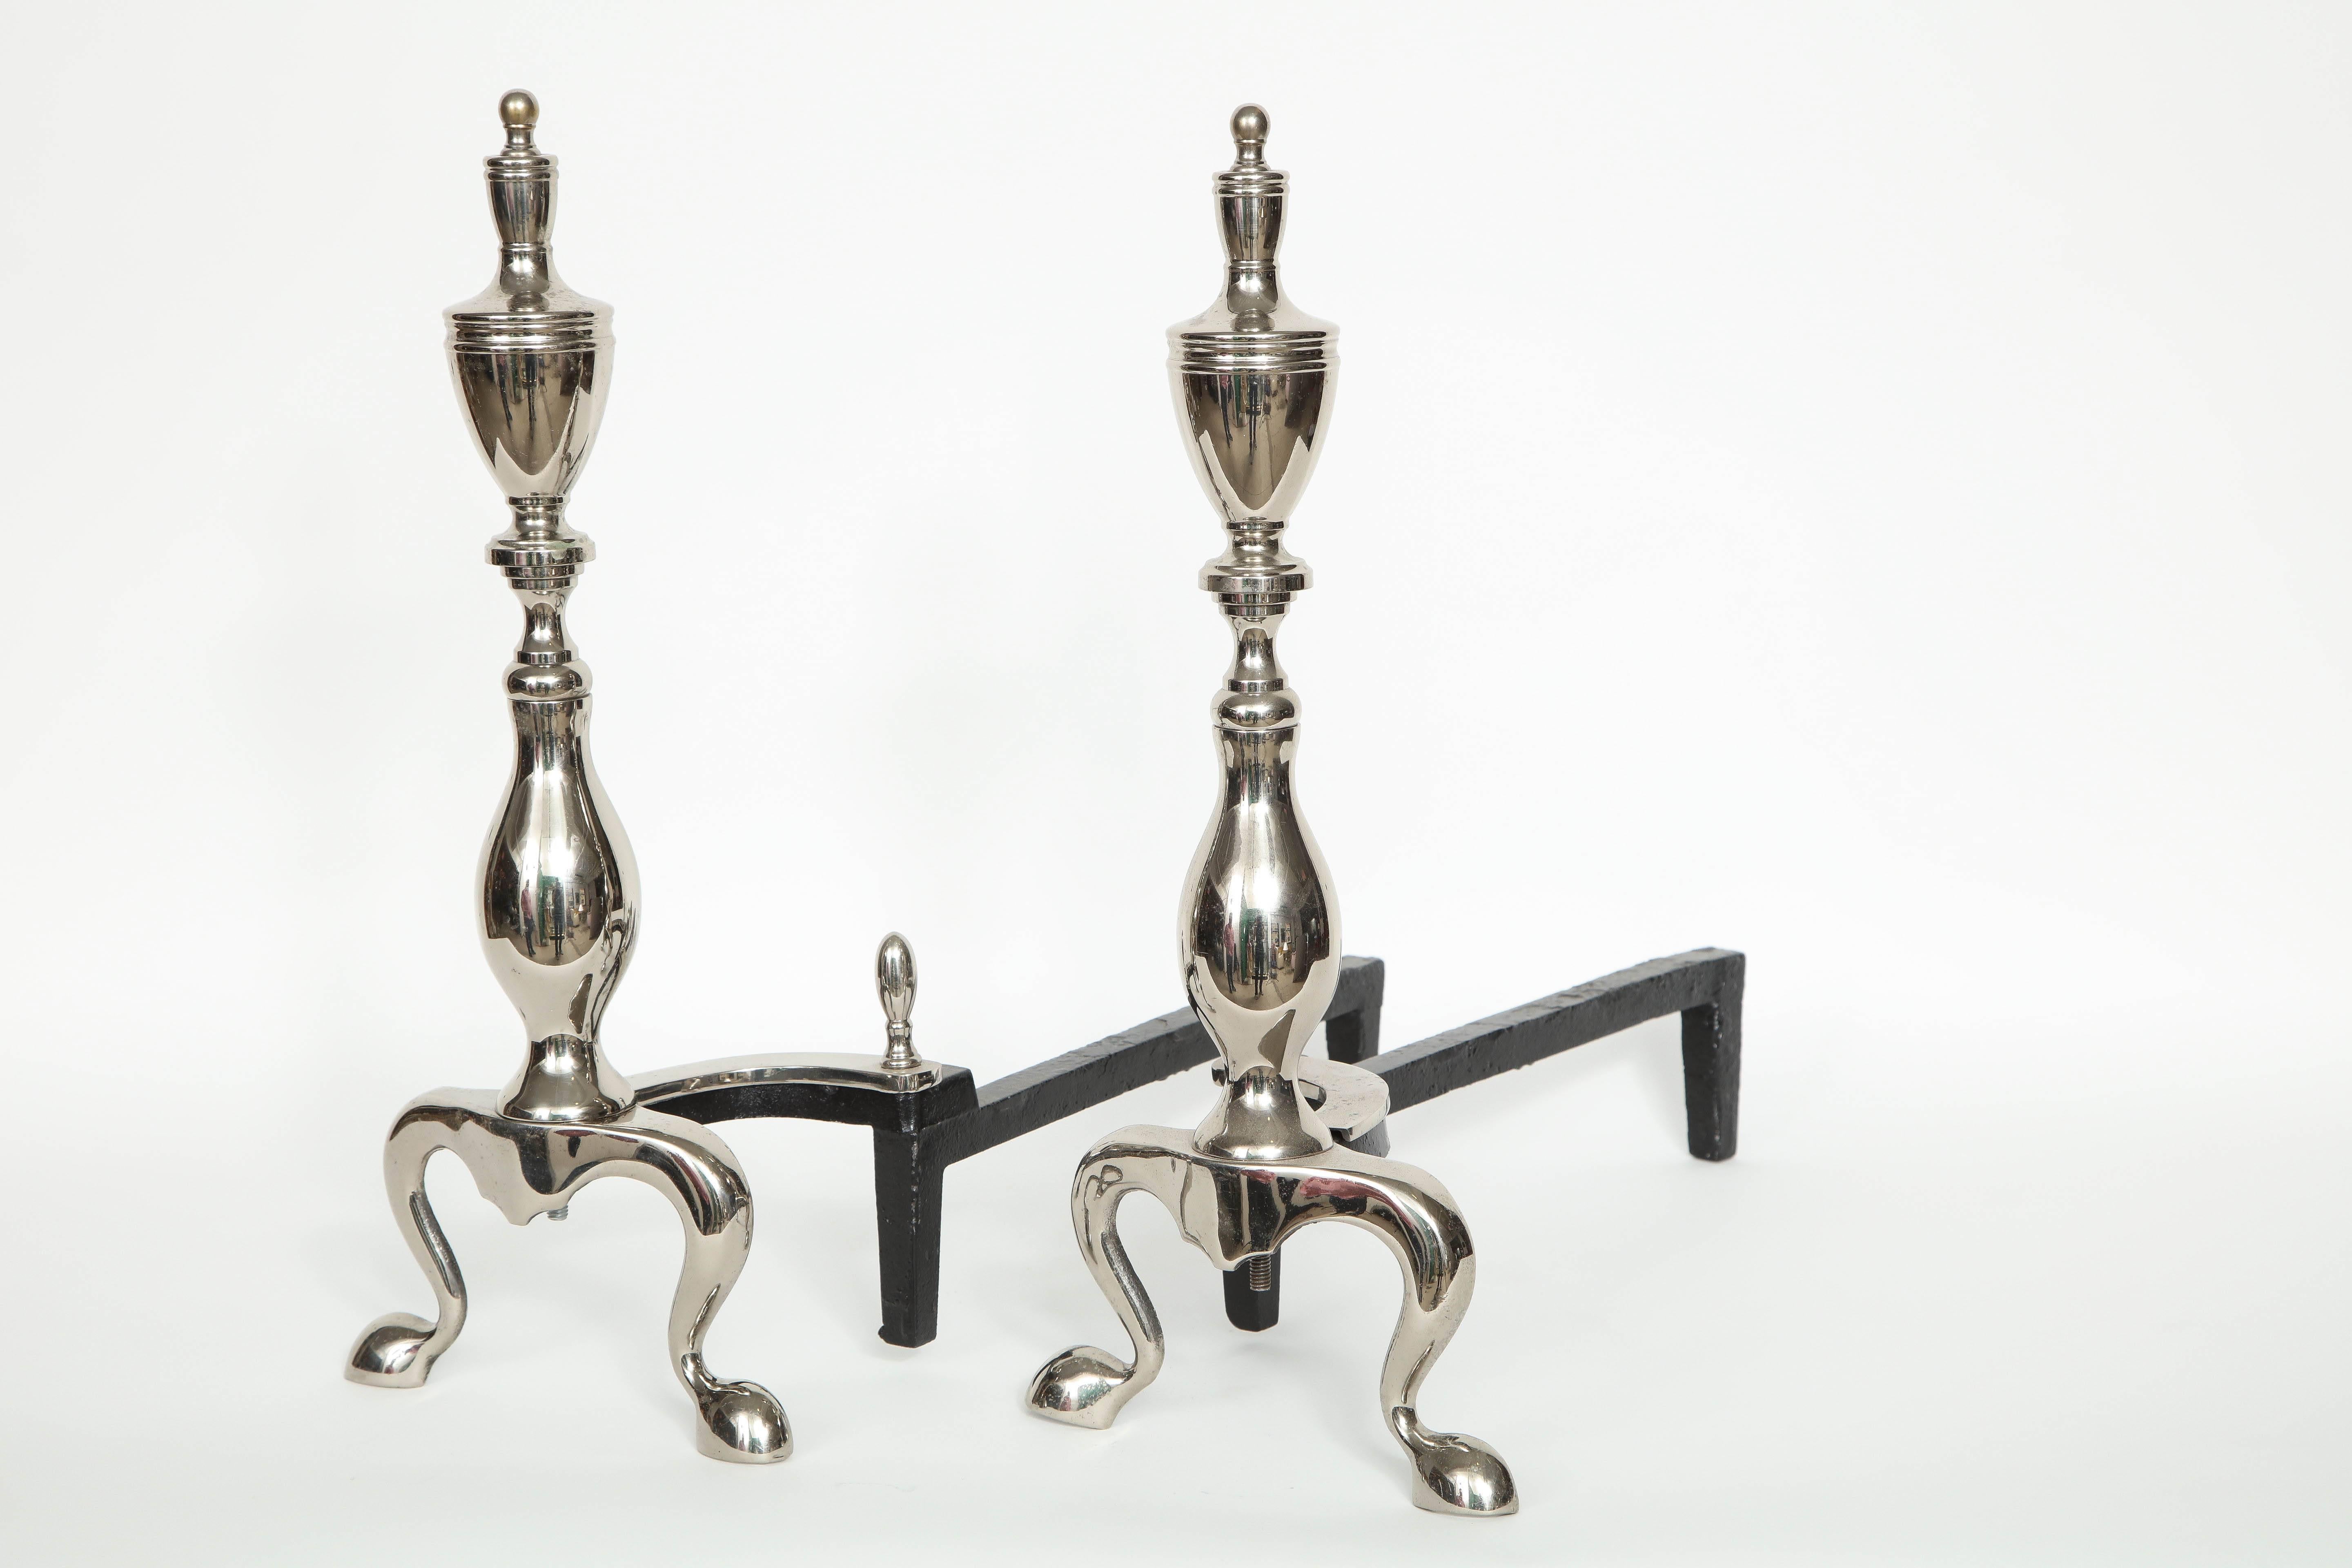 Pair of Mid-Century polished nickel andirons with a Chippendale influence and graceful Silhouette.